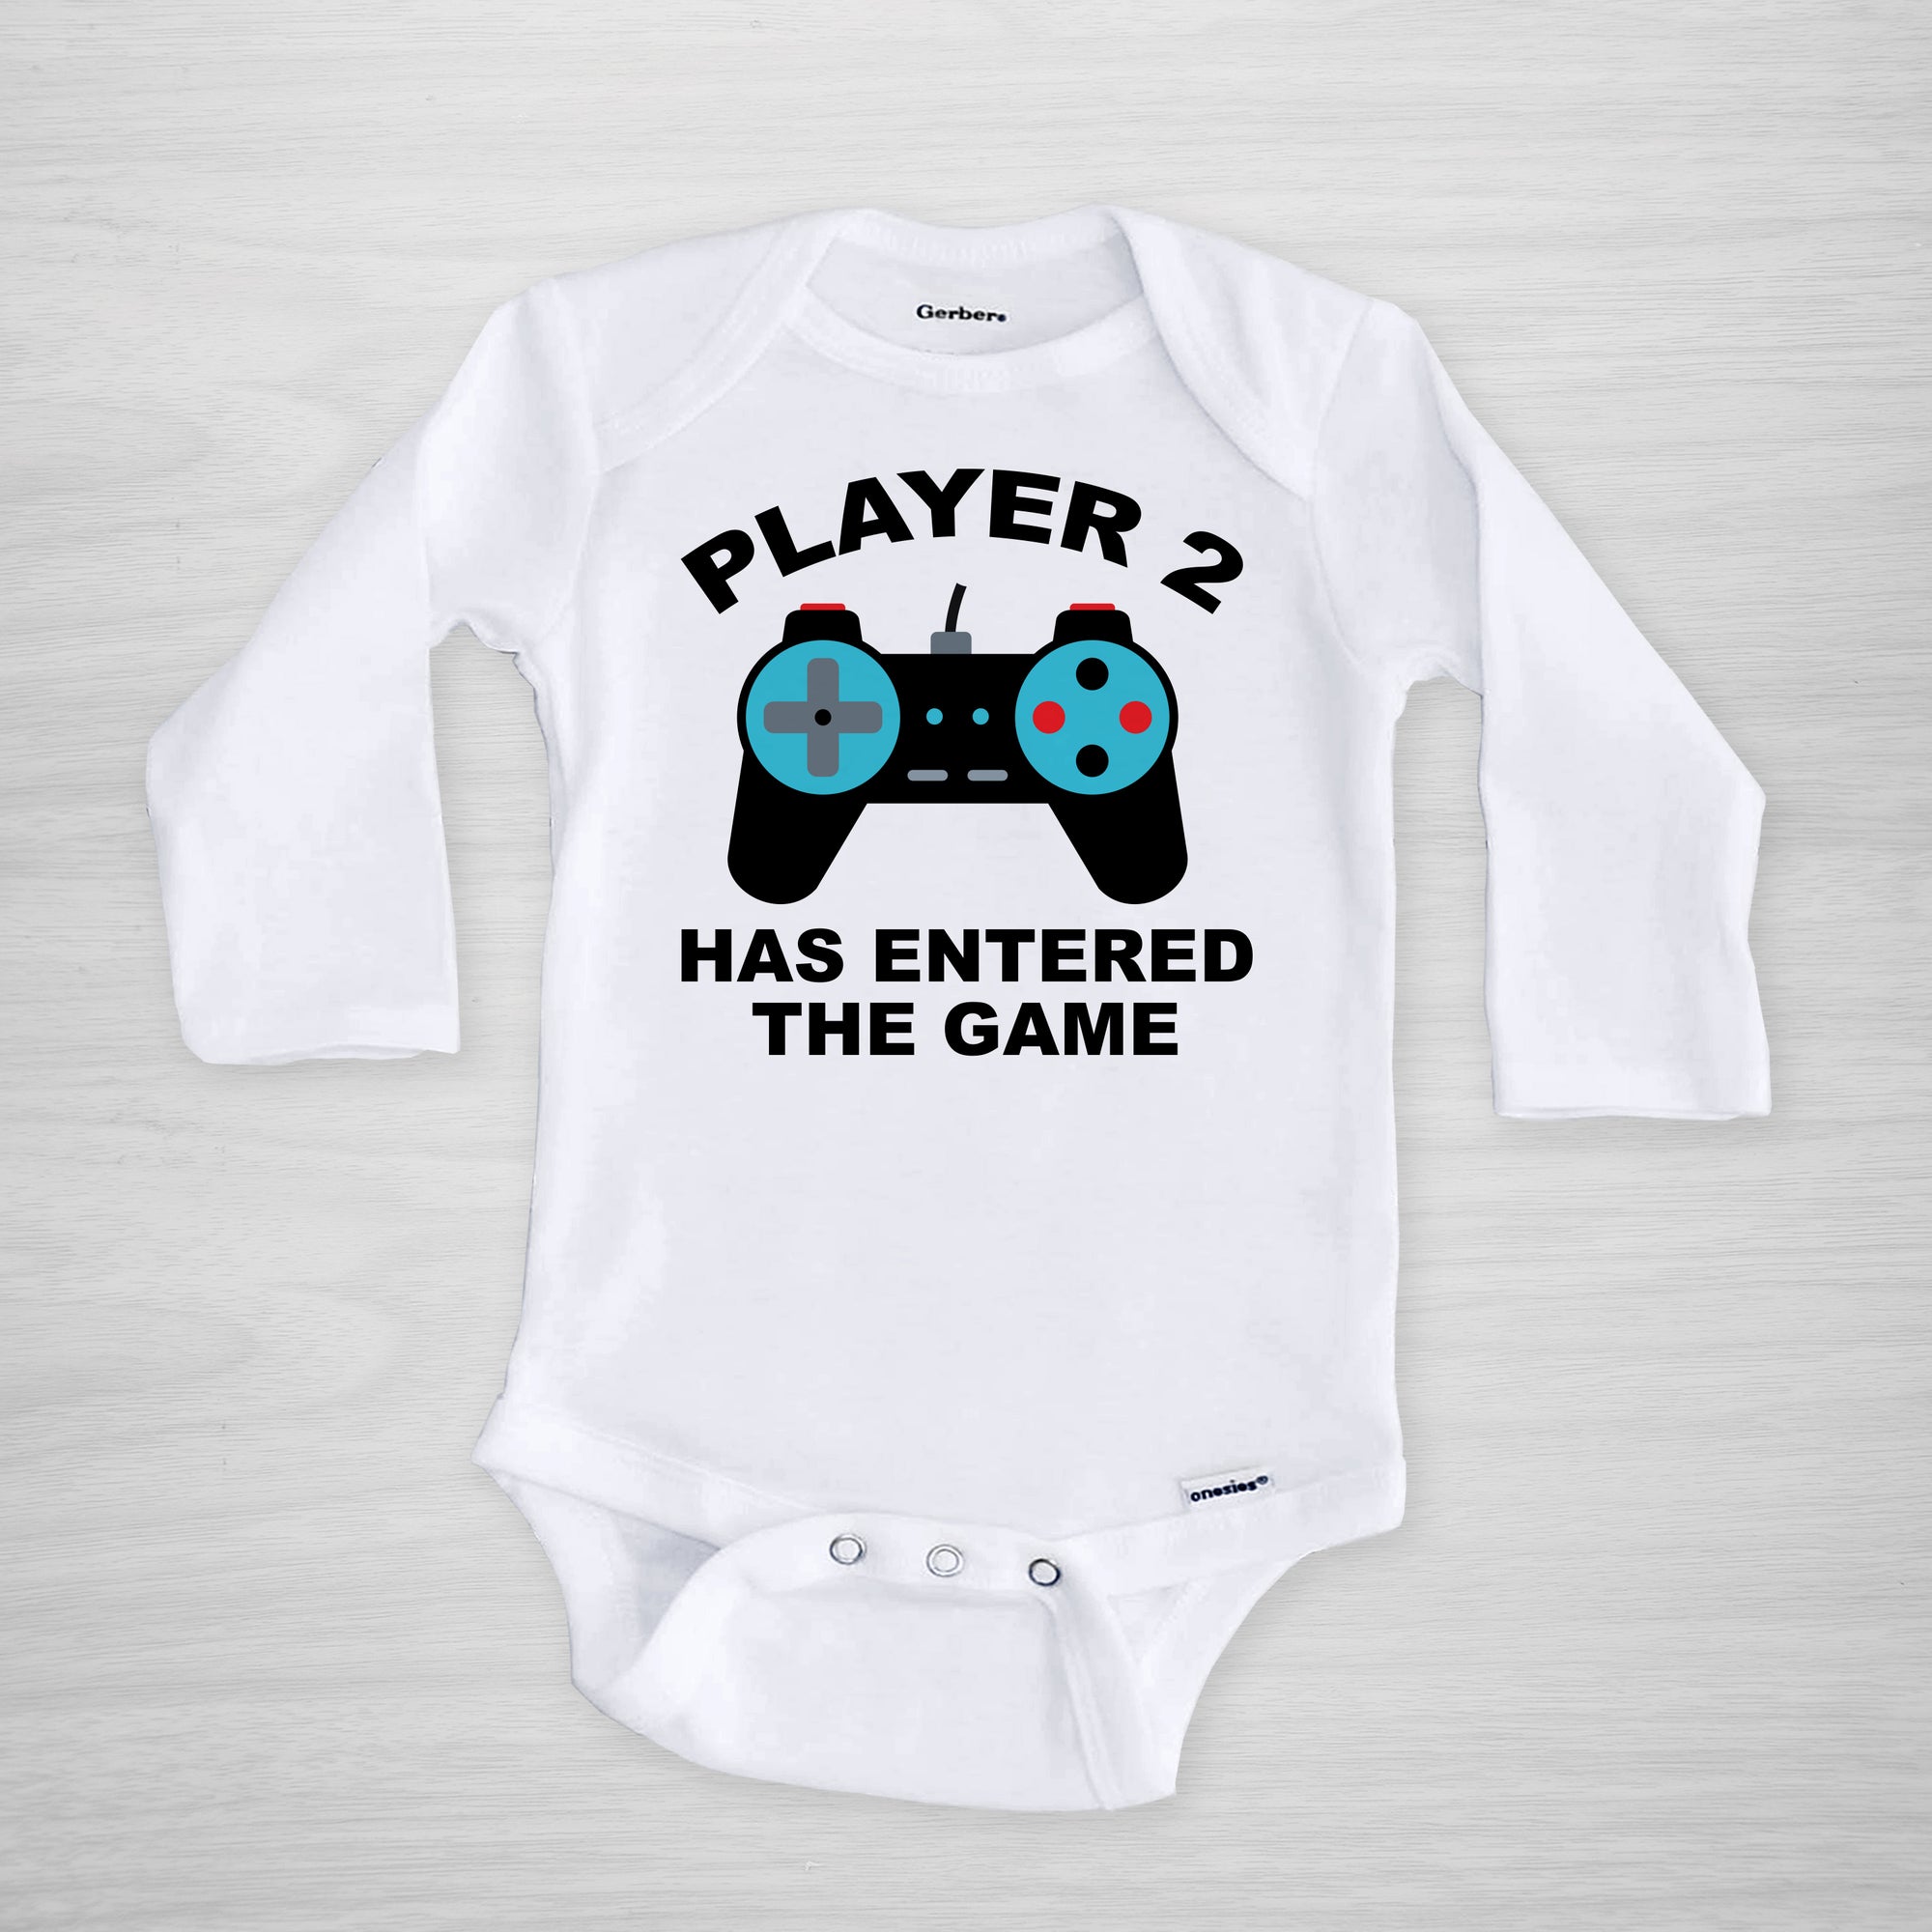 Player 2 Has Entered the Game Onesie, long sleeved